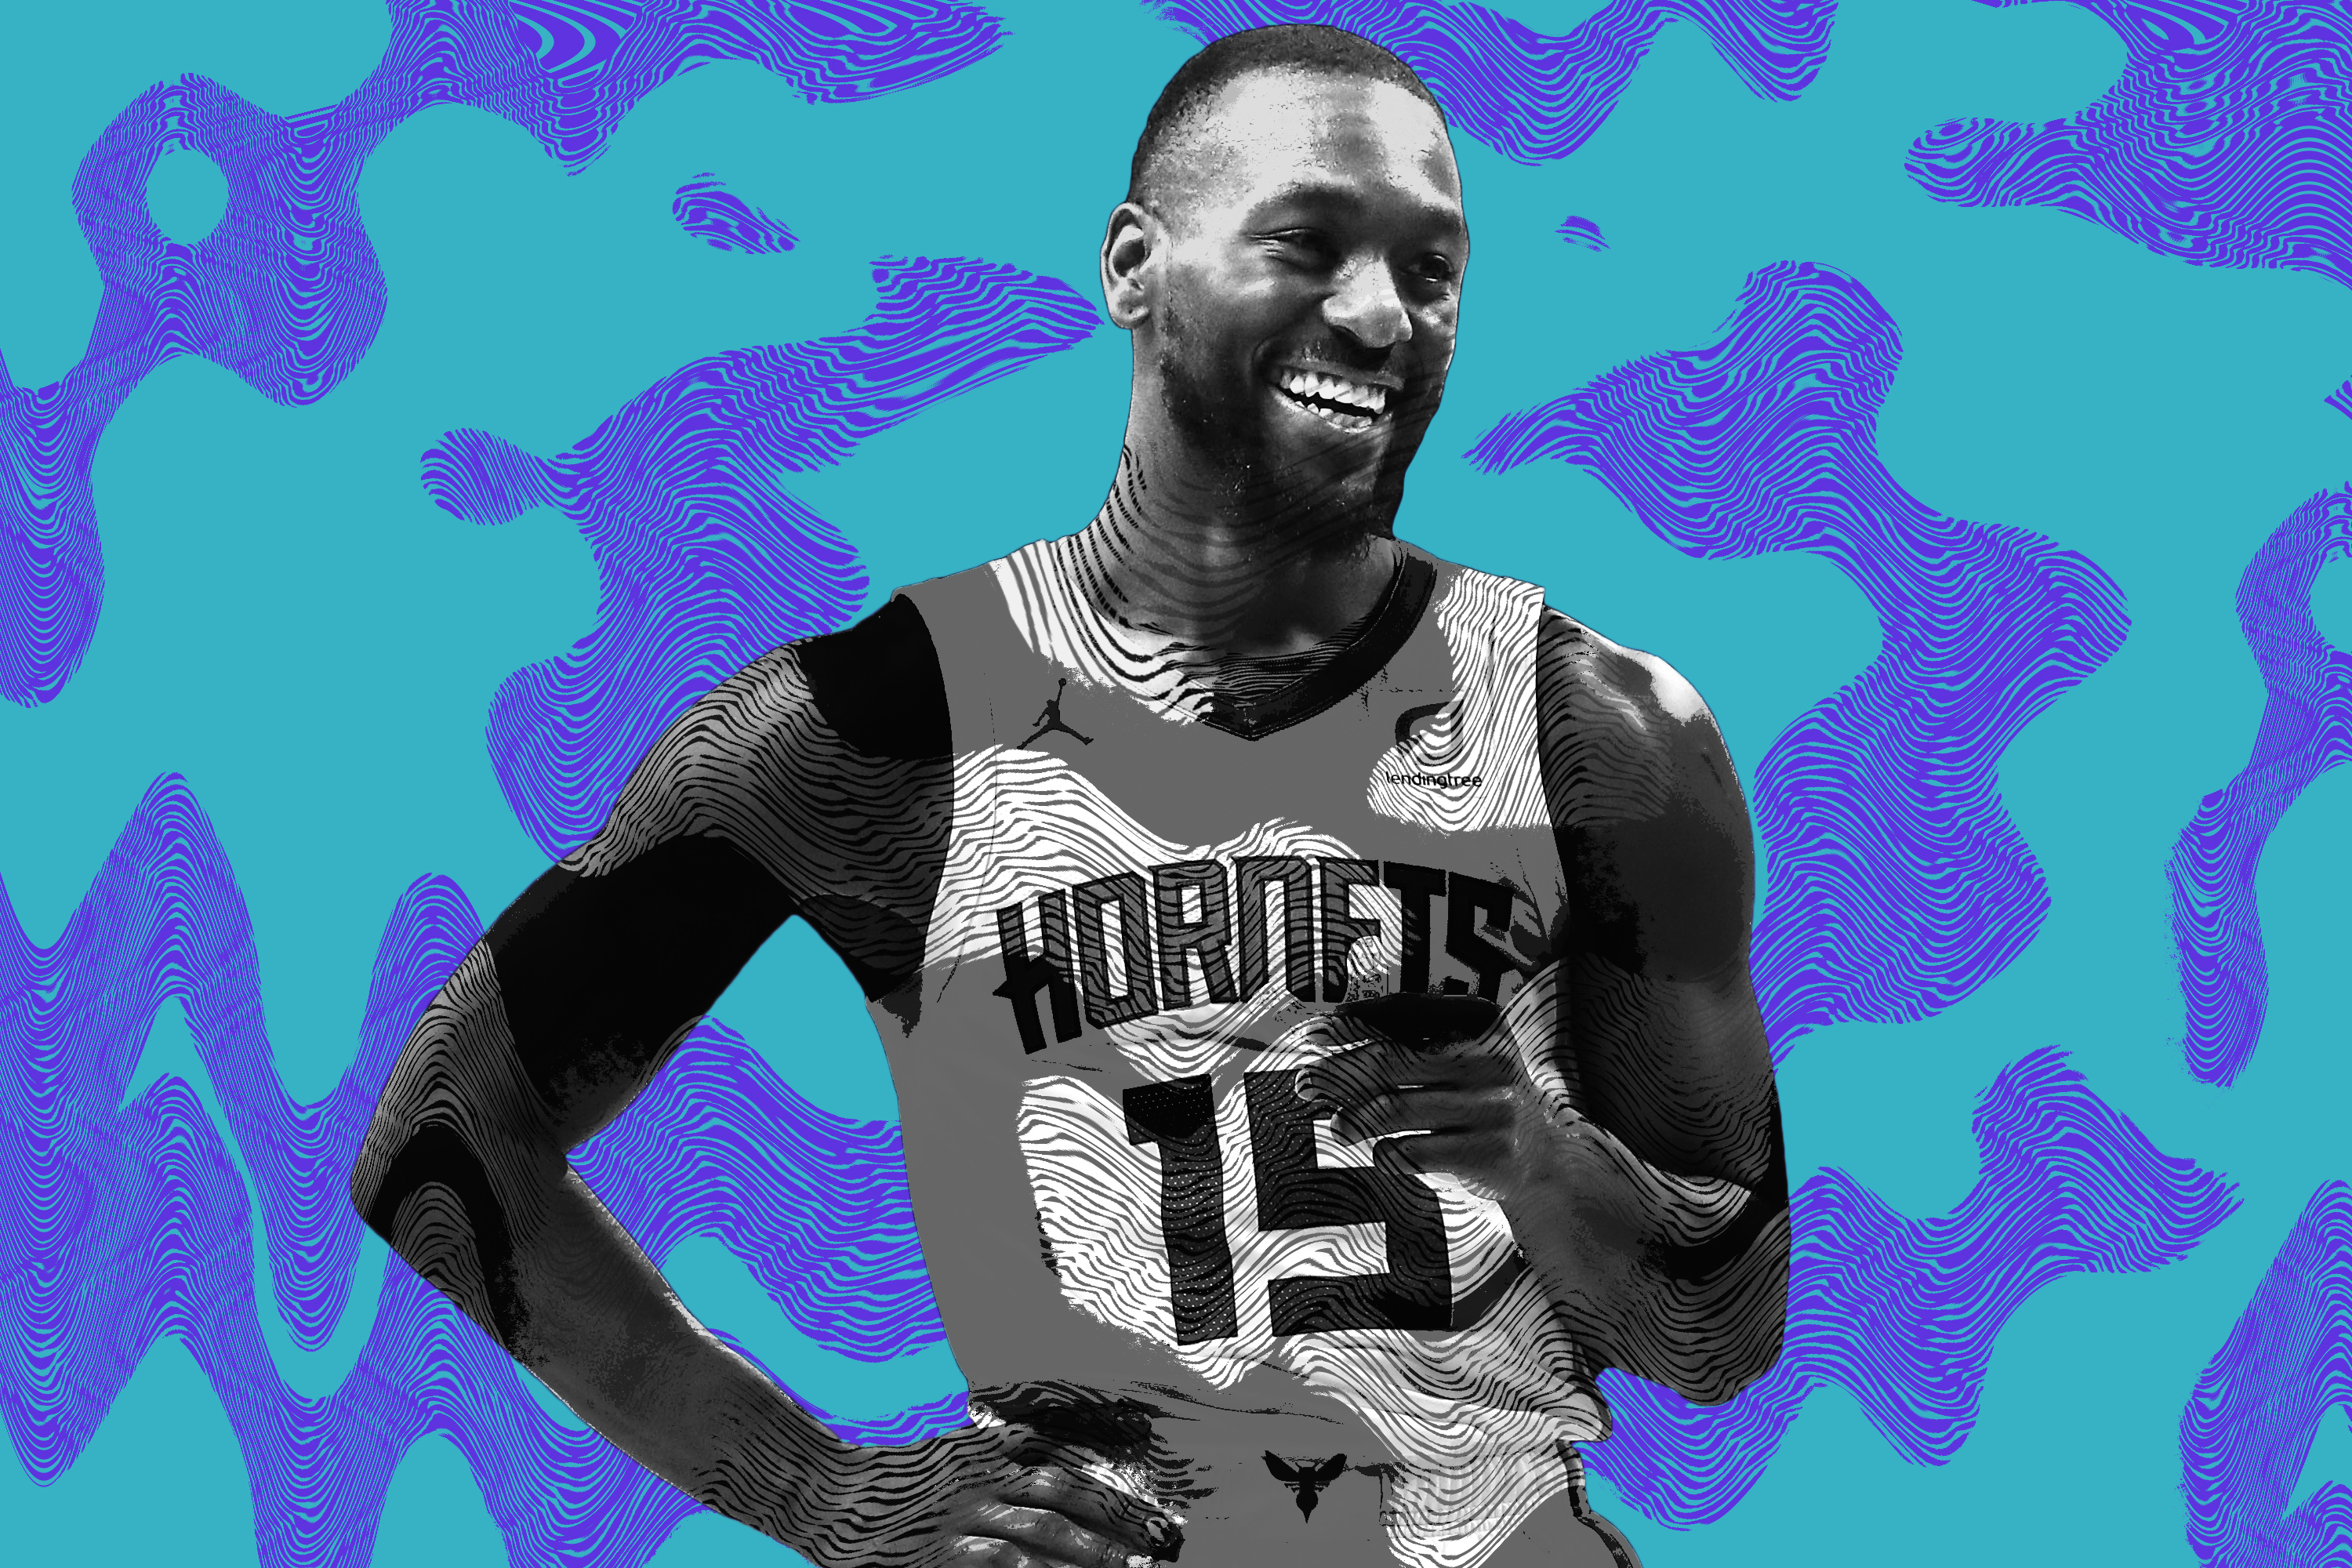 Kemba Walker Hornet's Hive Photo with Autographed NBA Game-Used Floor Curve  Display